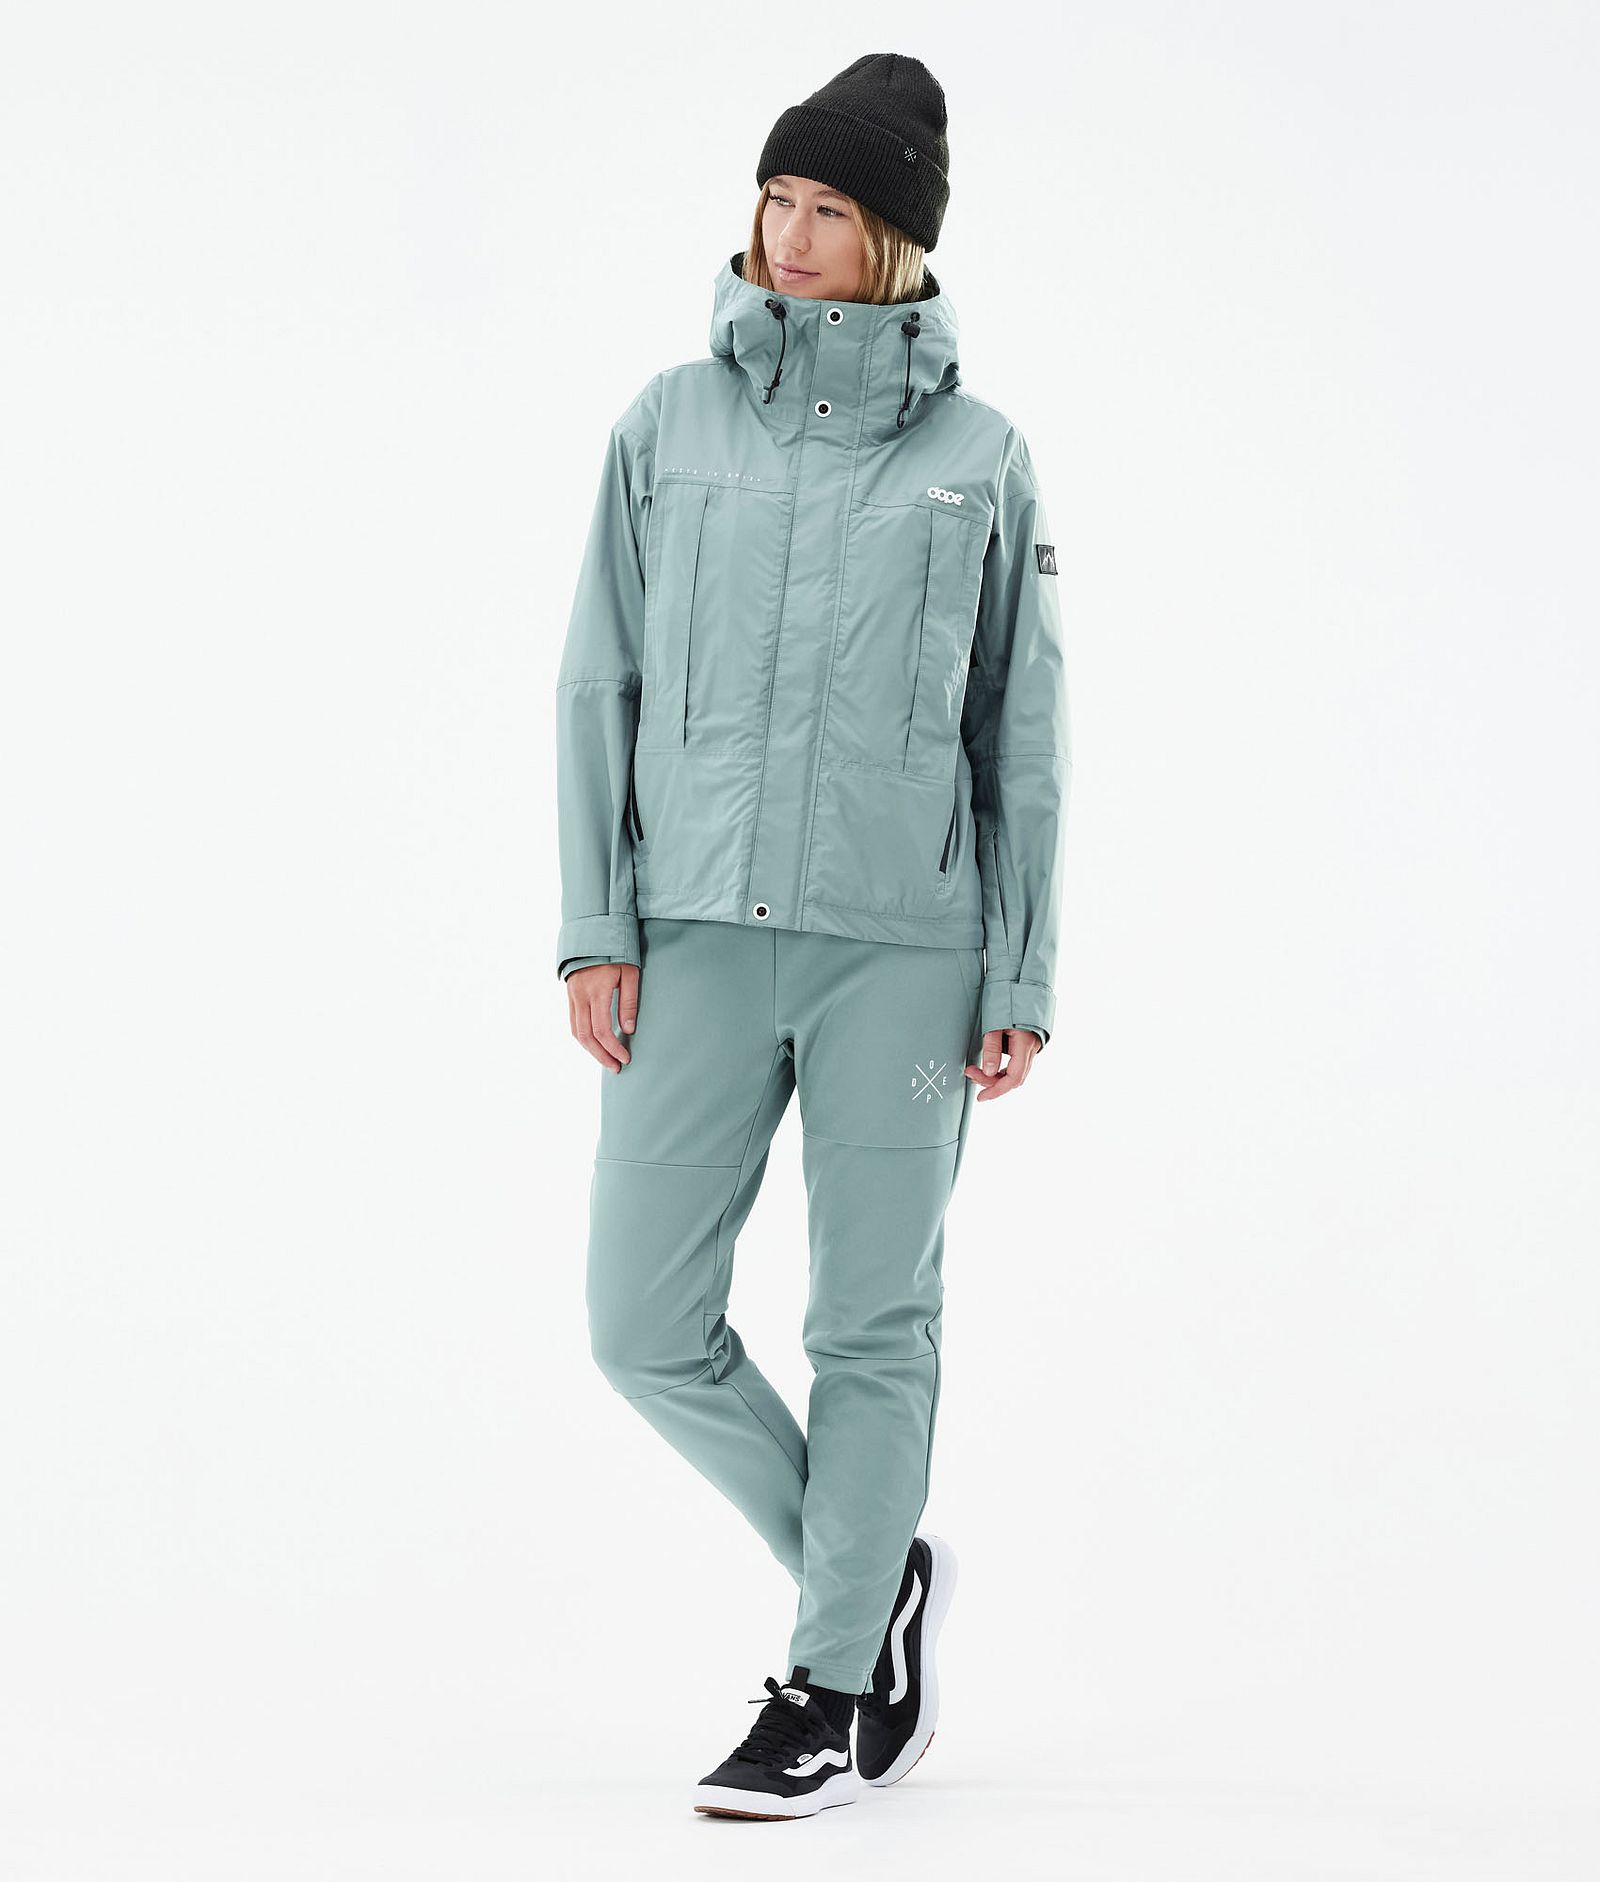 Dope Nomad W Pantalones Outdoor Mujer Faded Green